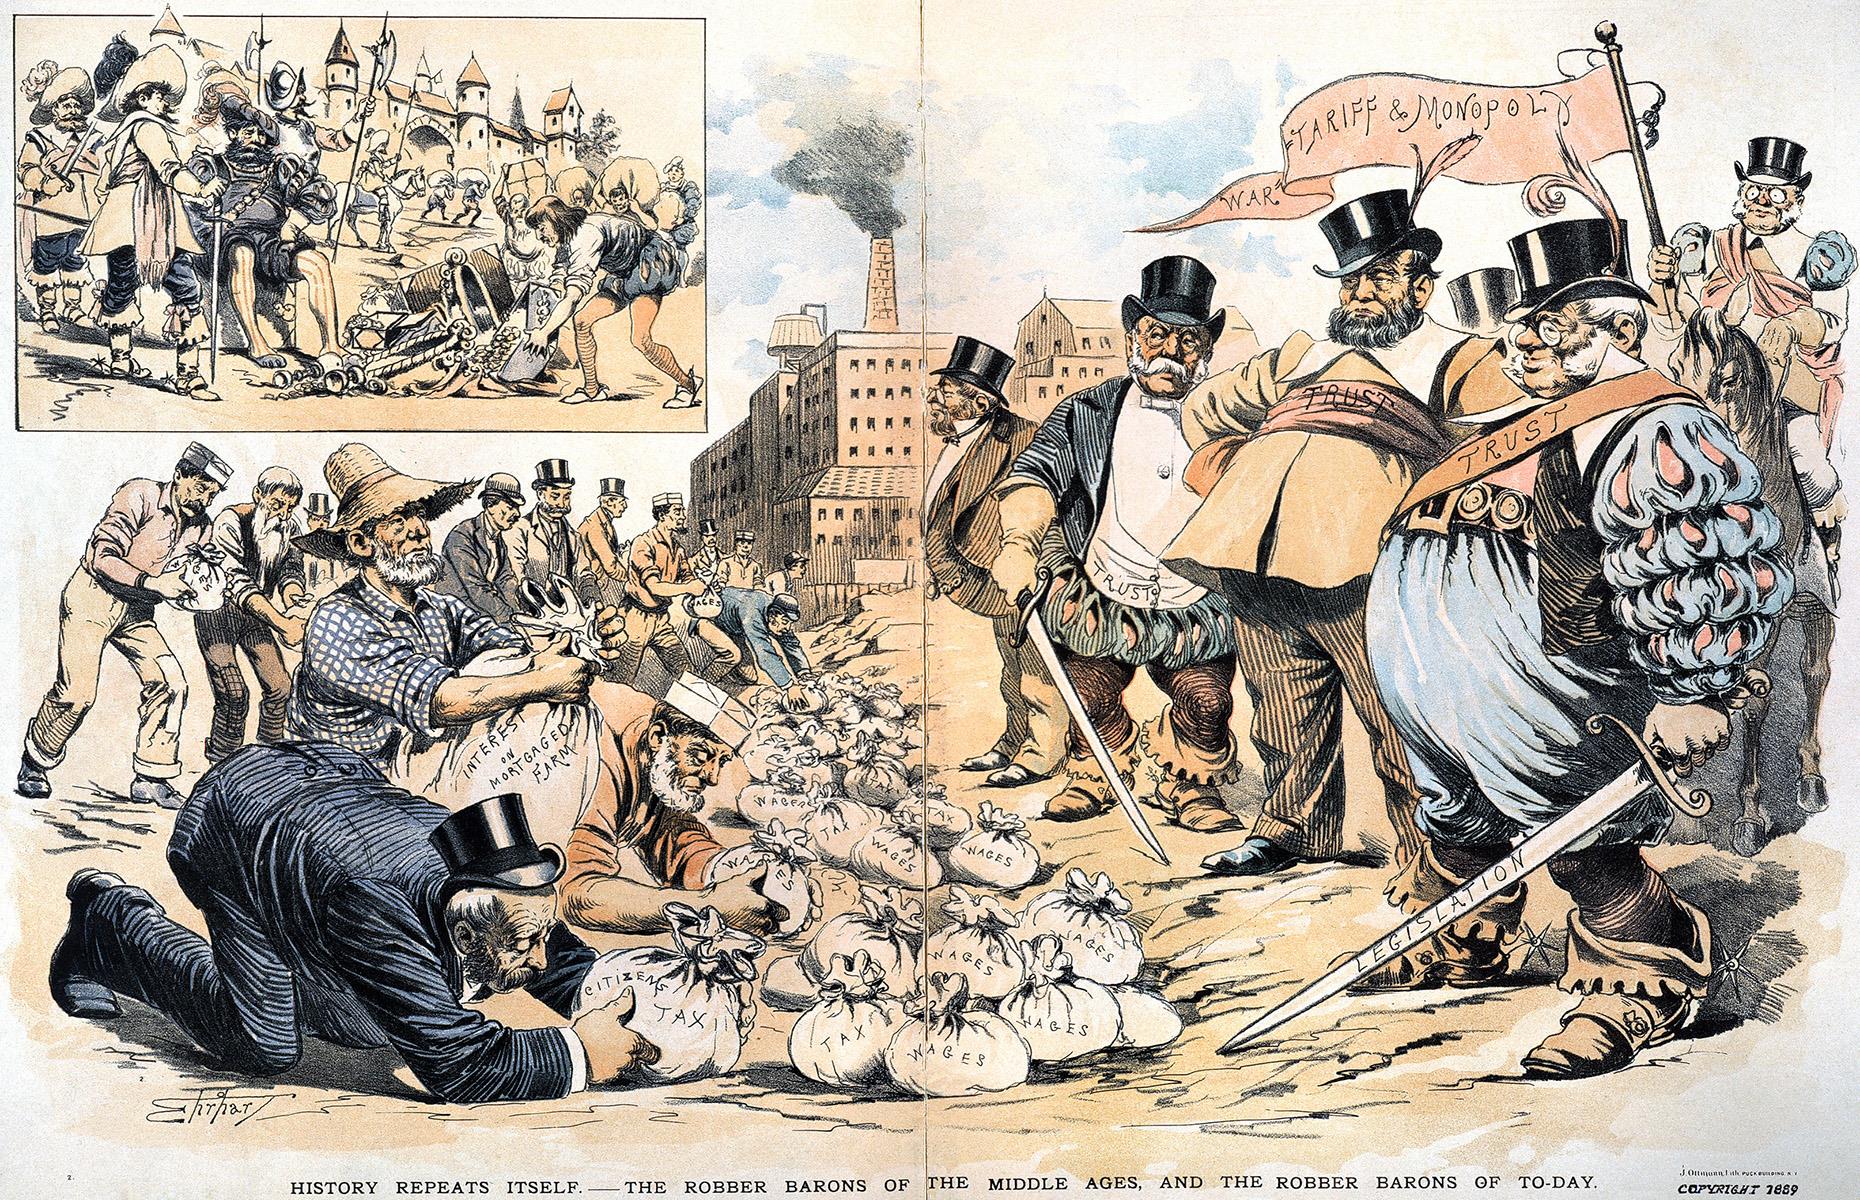 <p>The term "robber baron", first coined by <em>The New York Times</em> in an 1859 article to describe Cornelius Vanderbilt, immediately captured the public imagination, conjuring up images of backroom government deals and mammoth financial monopolies.</p>  <p>As the phrase entered into common parlance, Vanderbilt and his financial compatriots began the uphill battle of buying their way back into society’s good books, brick by marble brick.</p>  <p><strong>Let's explore some of the magnificent homes they built…</strong></p>